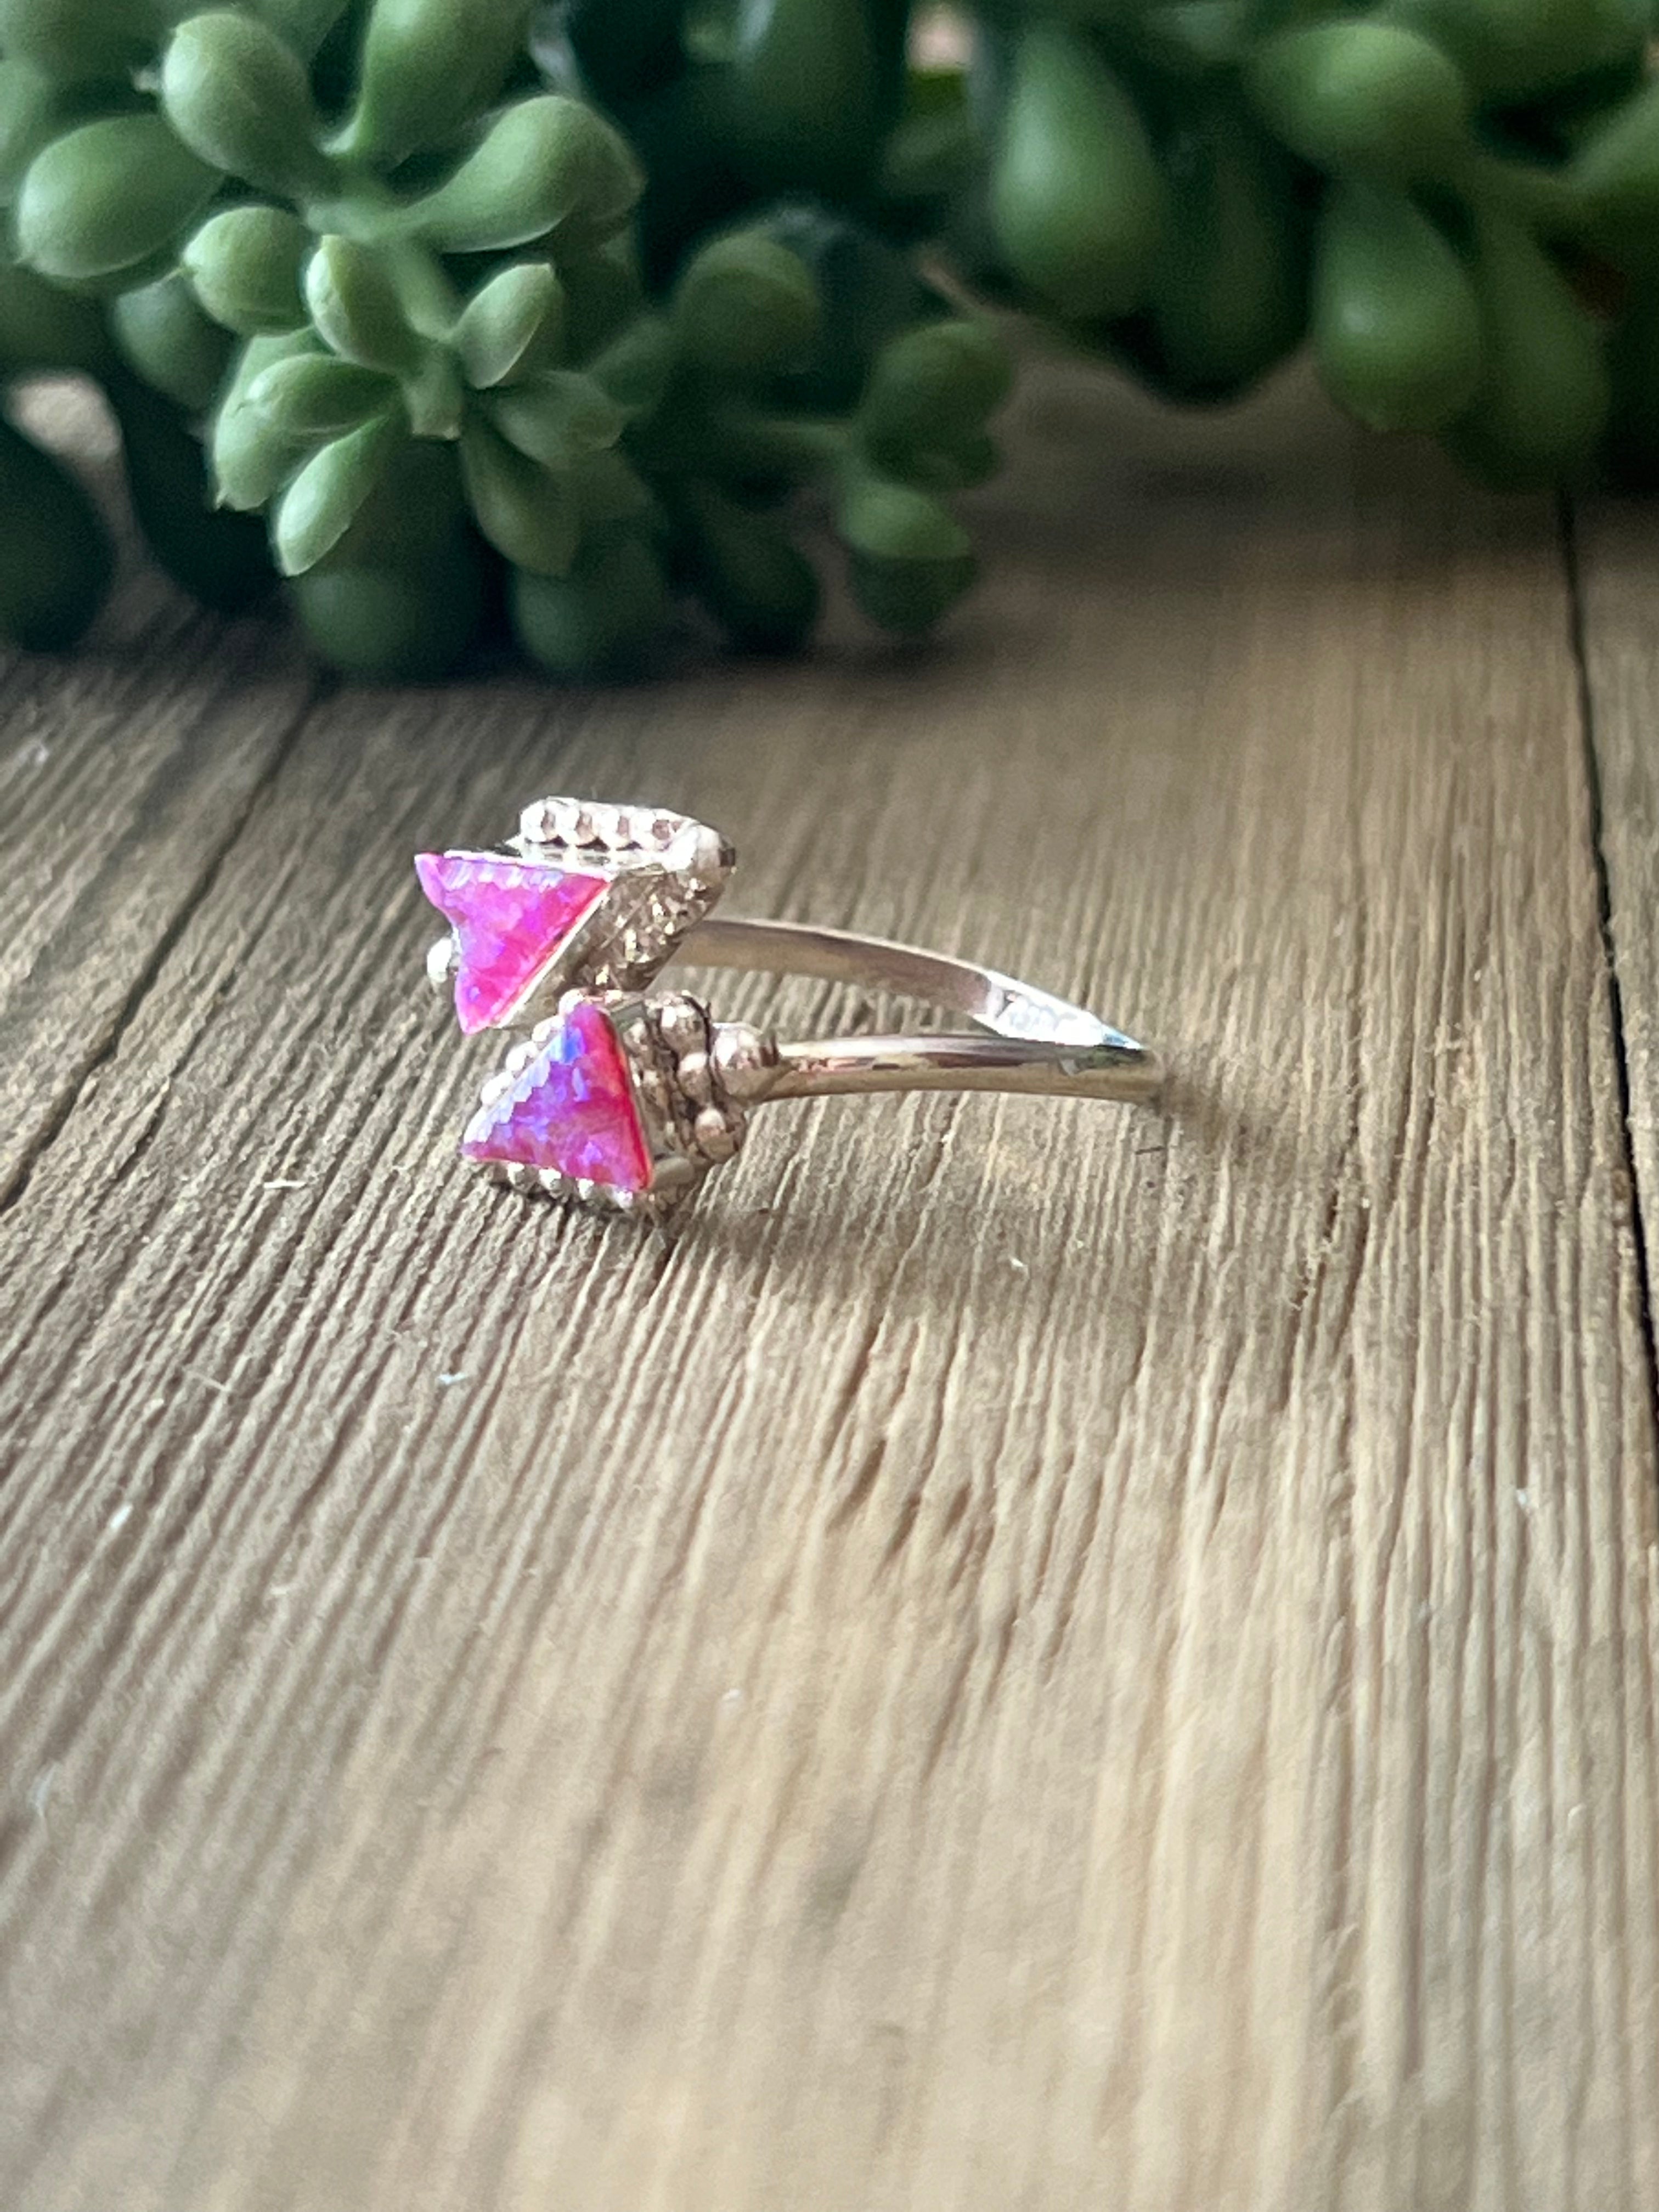 Zuni Made Pink Opal (Man Made) & Sterling Silver Adjustable Ring